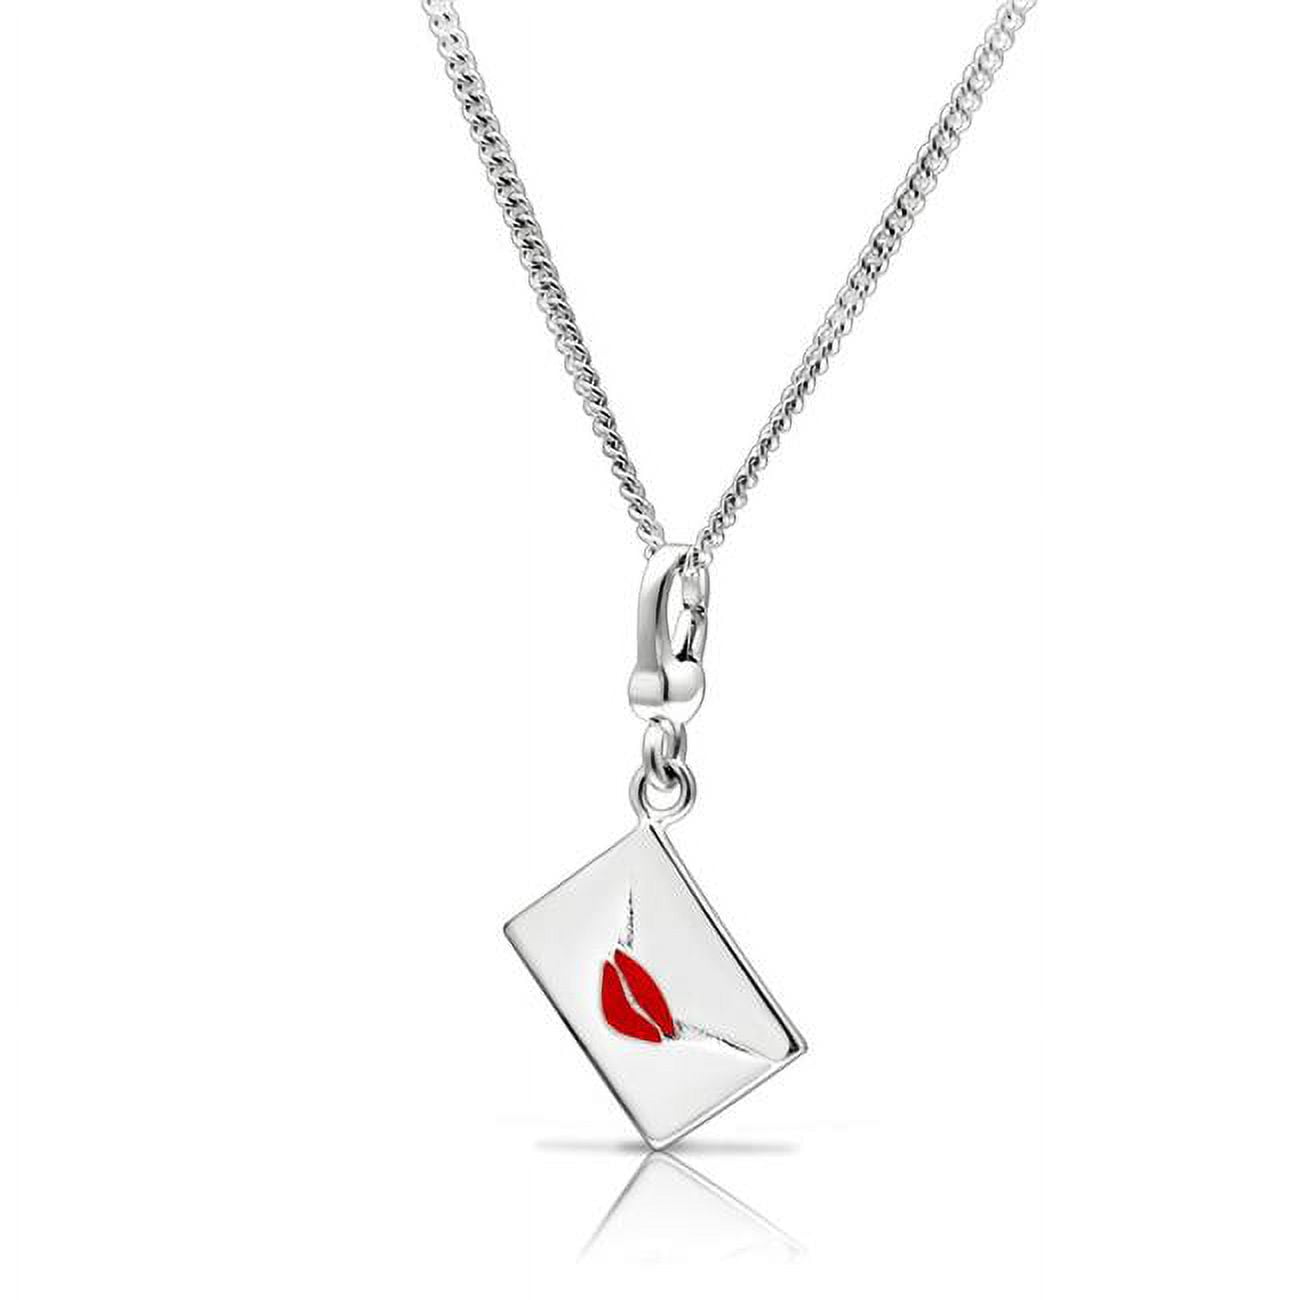 Picture of Alamode LOS432-18 Women Silver 925 Sterling Silver Chain Pendant with No Stone in No Stone - 18 in.